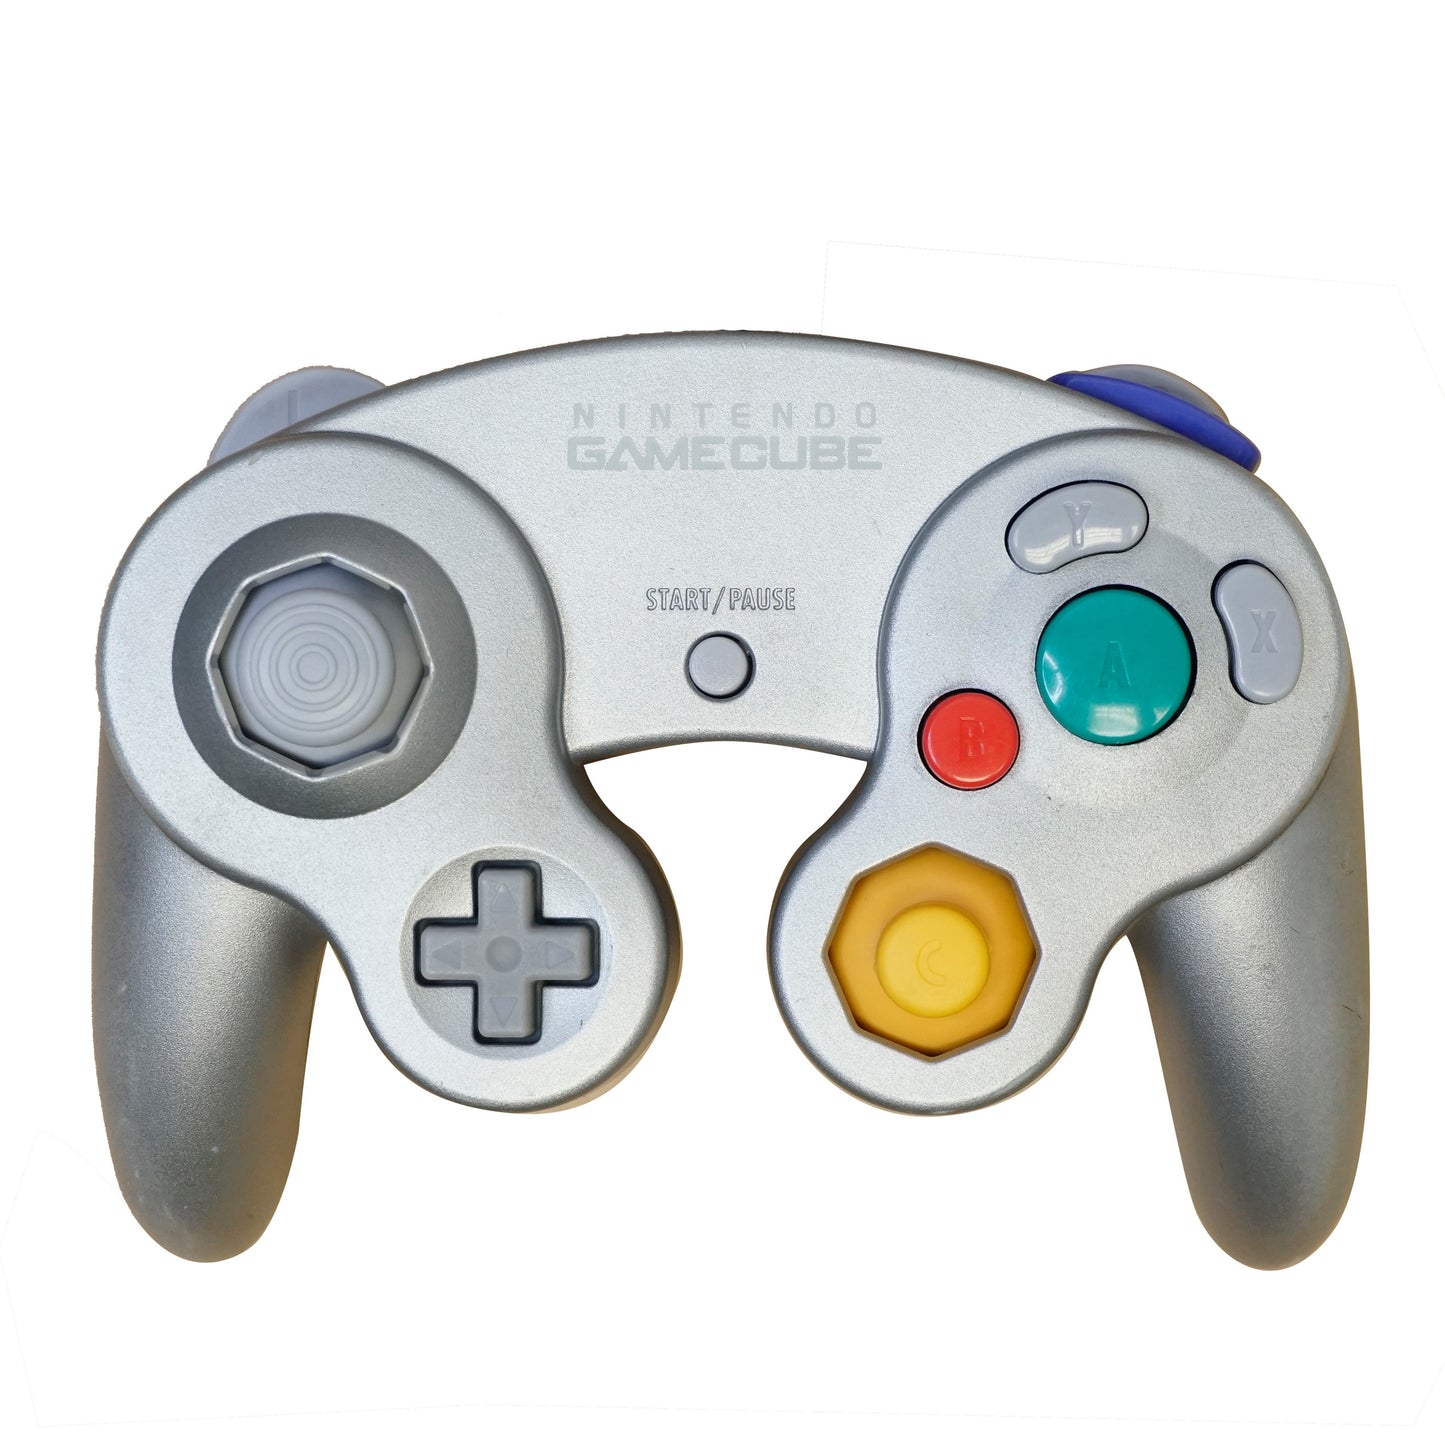 Made To Order | OEM Refurbed GameCube Controllers Modding